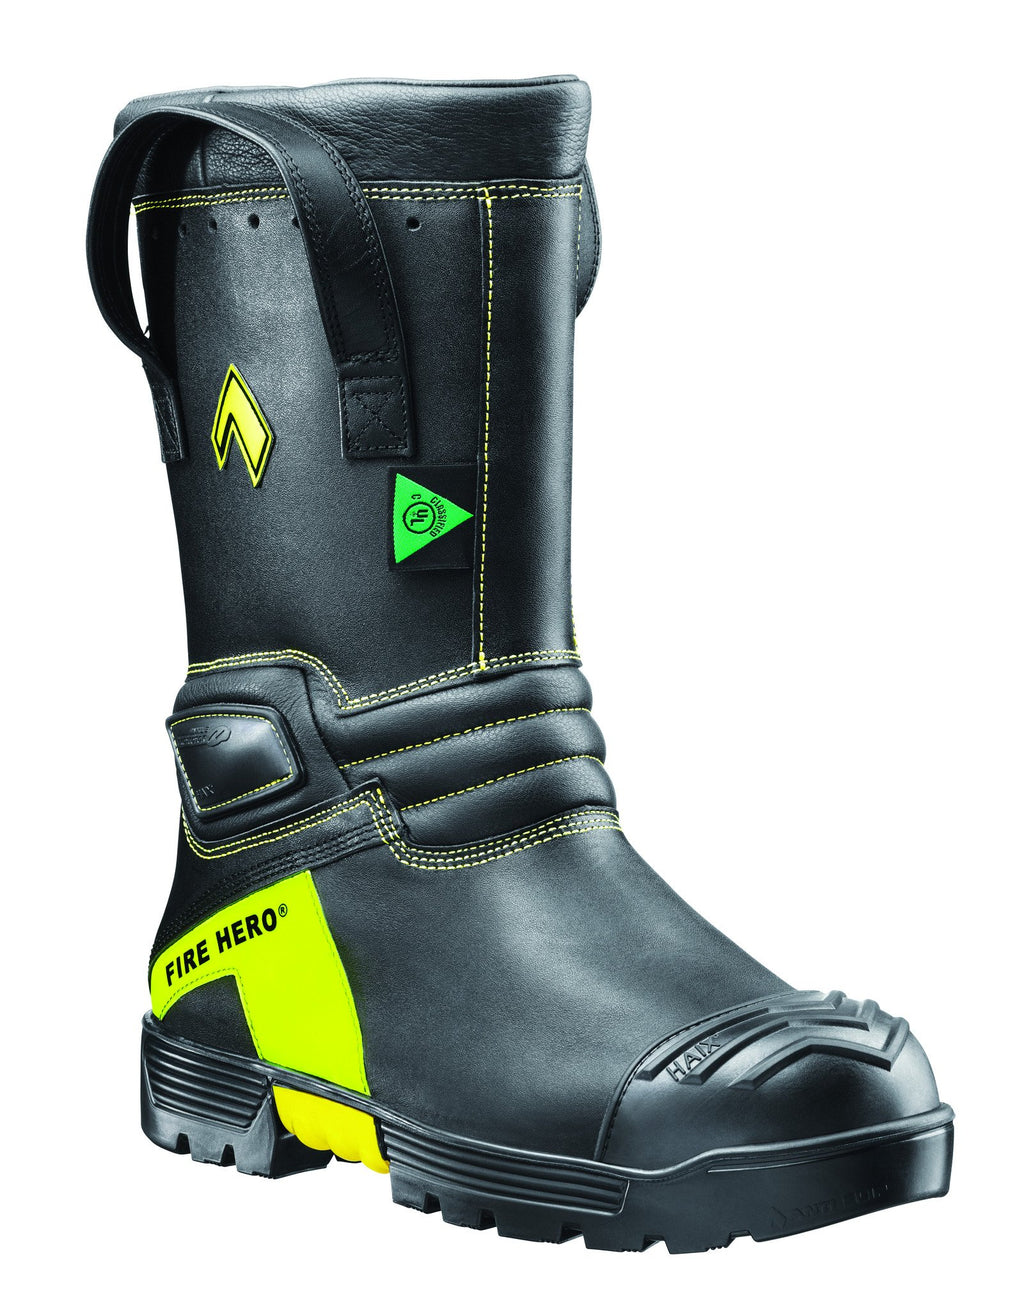 Haix Fire Hero Xtreme Boots - mtrsuperstore